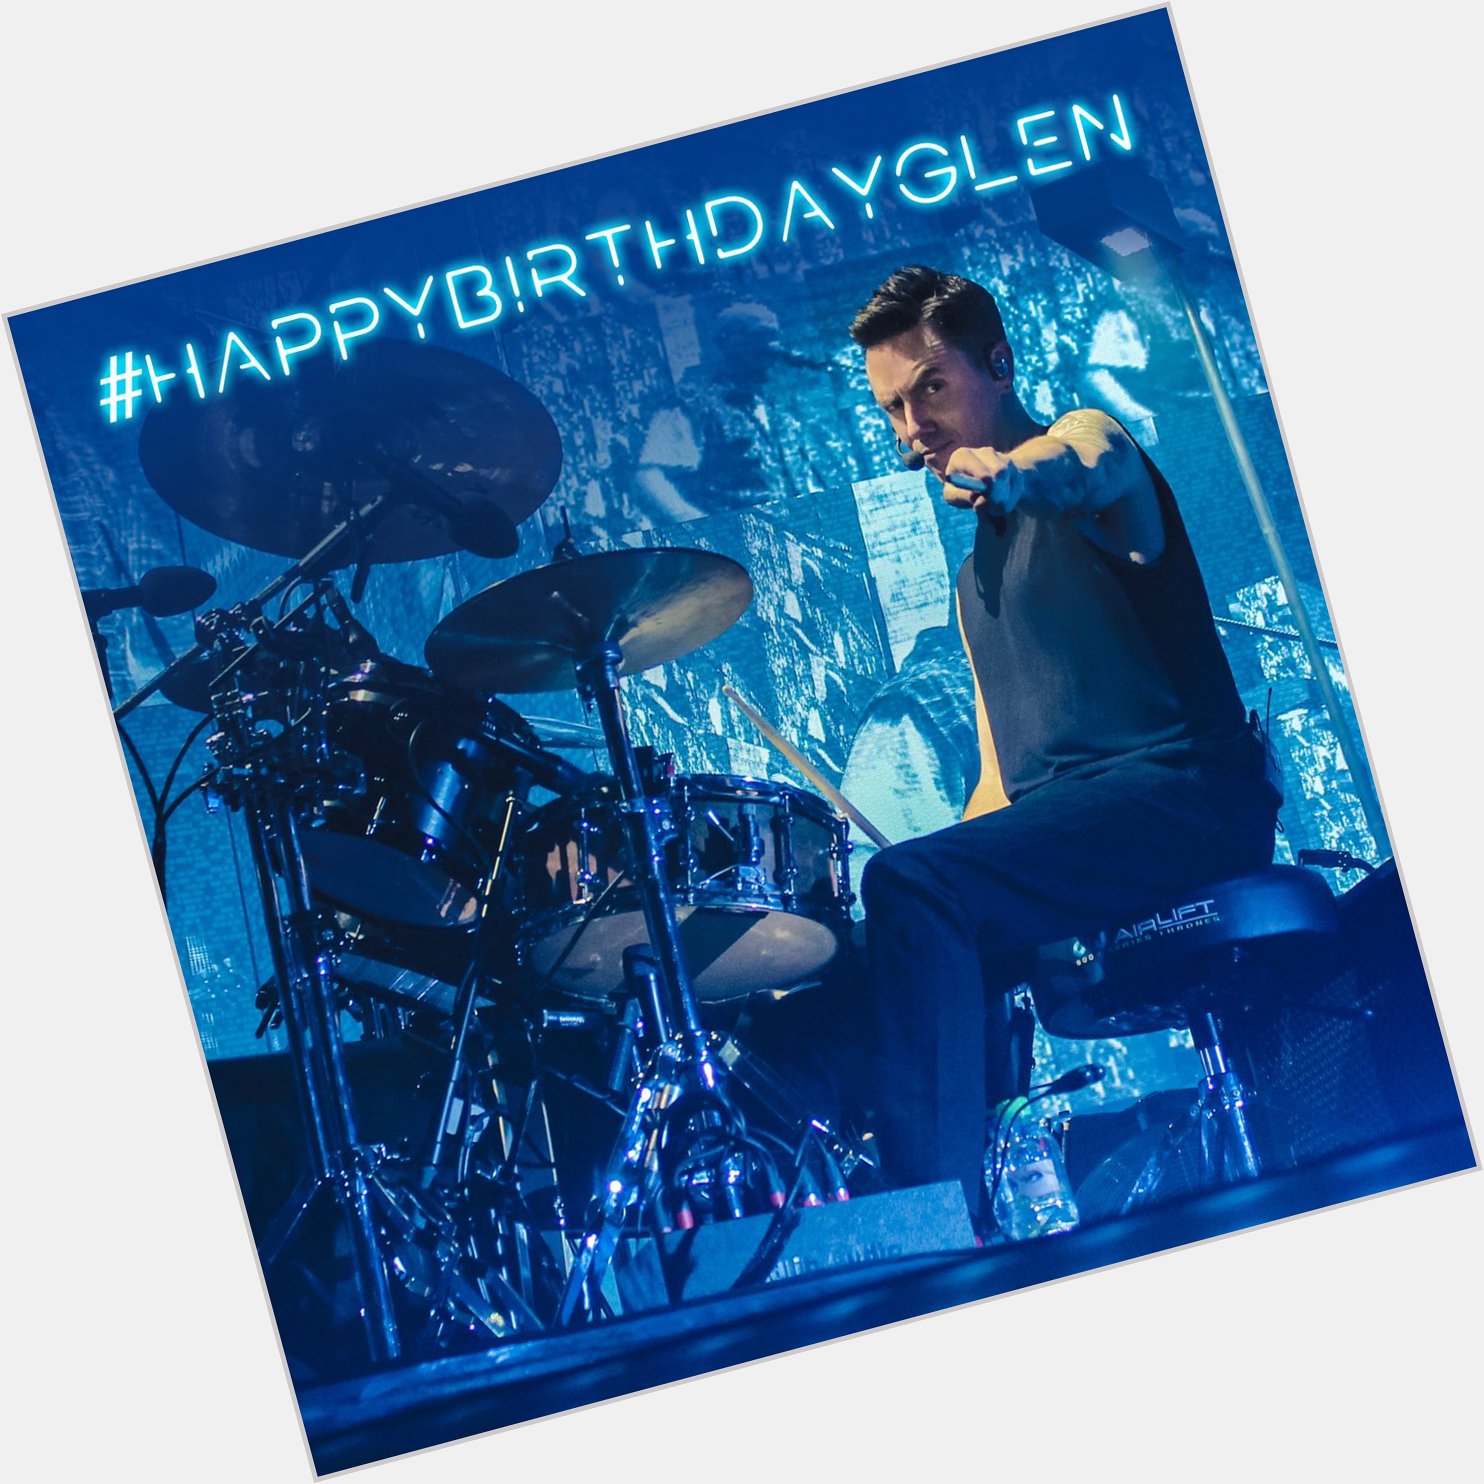 Happy Birthday to the one, the only... Glen Power! Send in your messages 